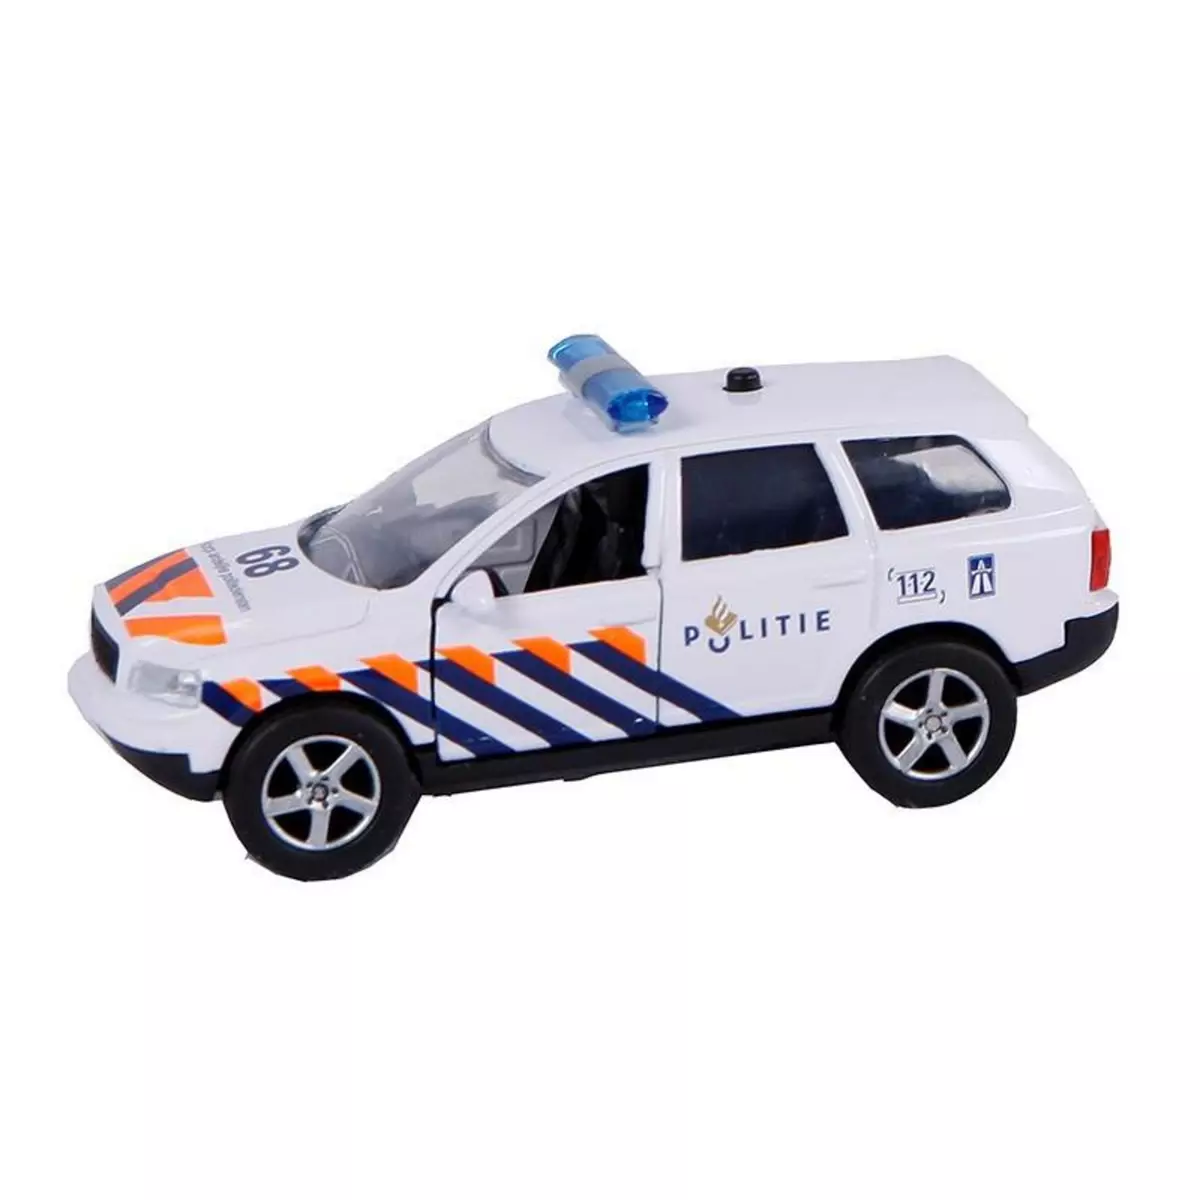 2 PLAY TRAFFIC 2-PLAY TRAFFIC 2-Play Die-cast Pull Back Police NL Light and Sound